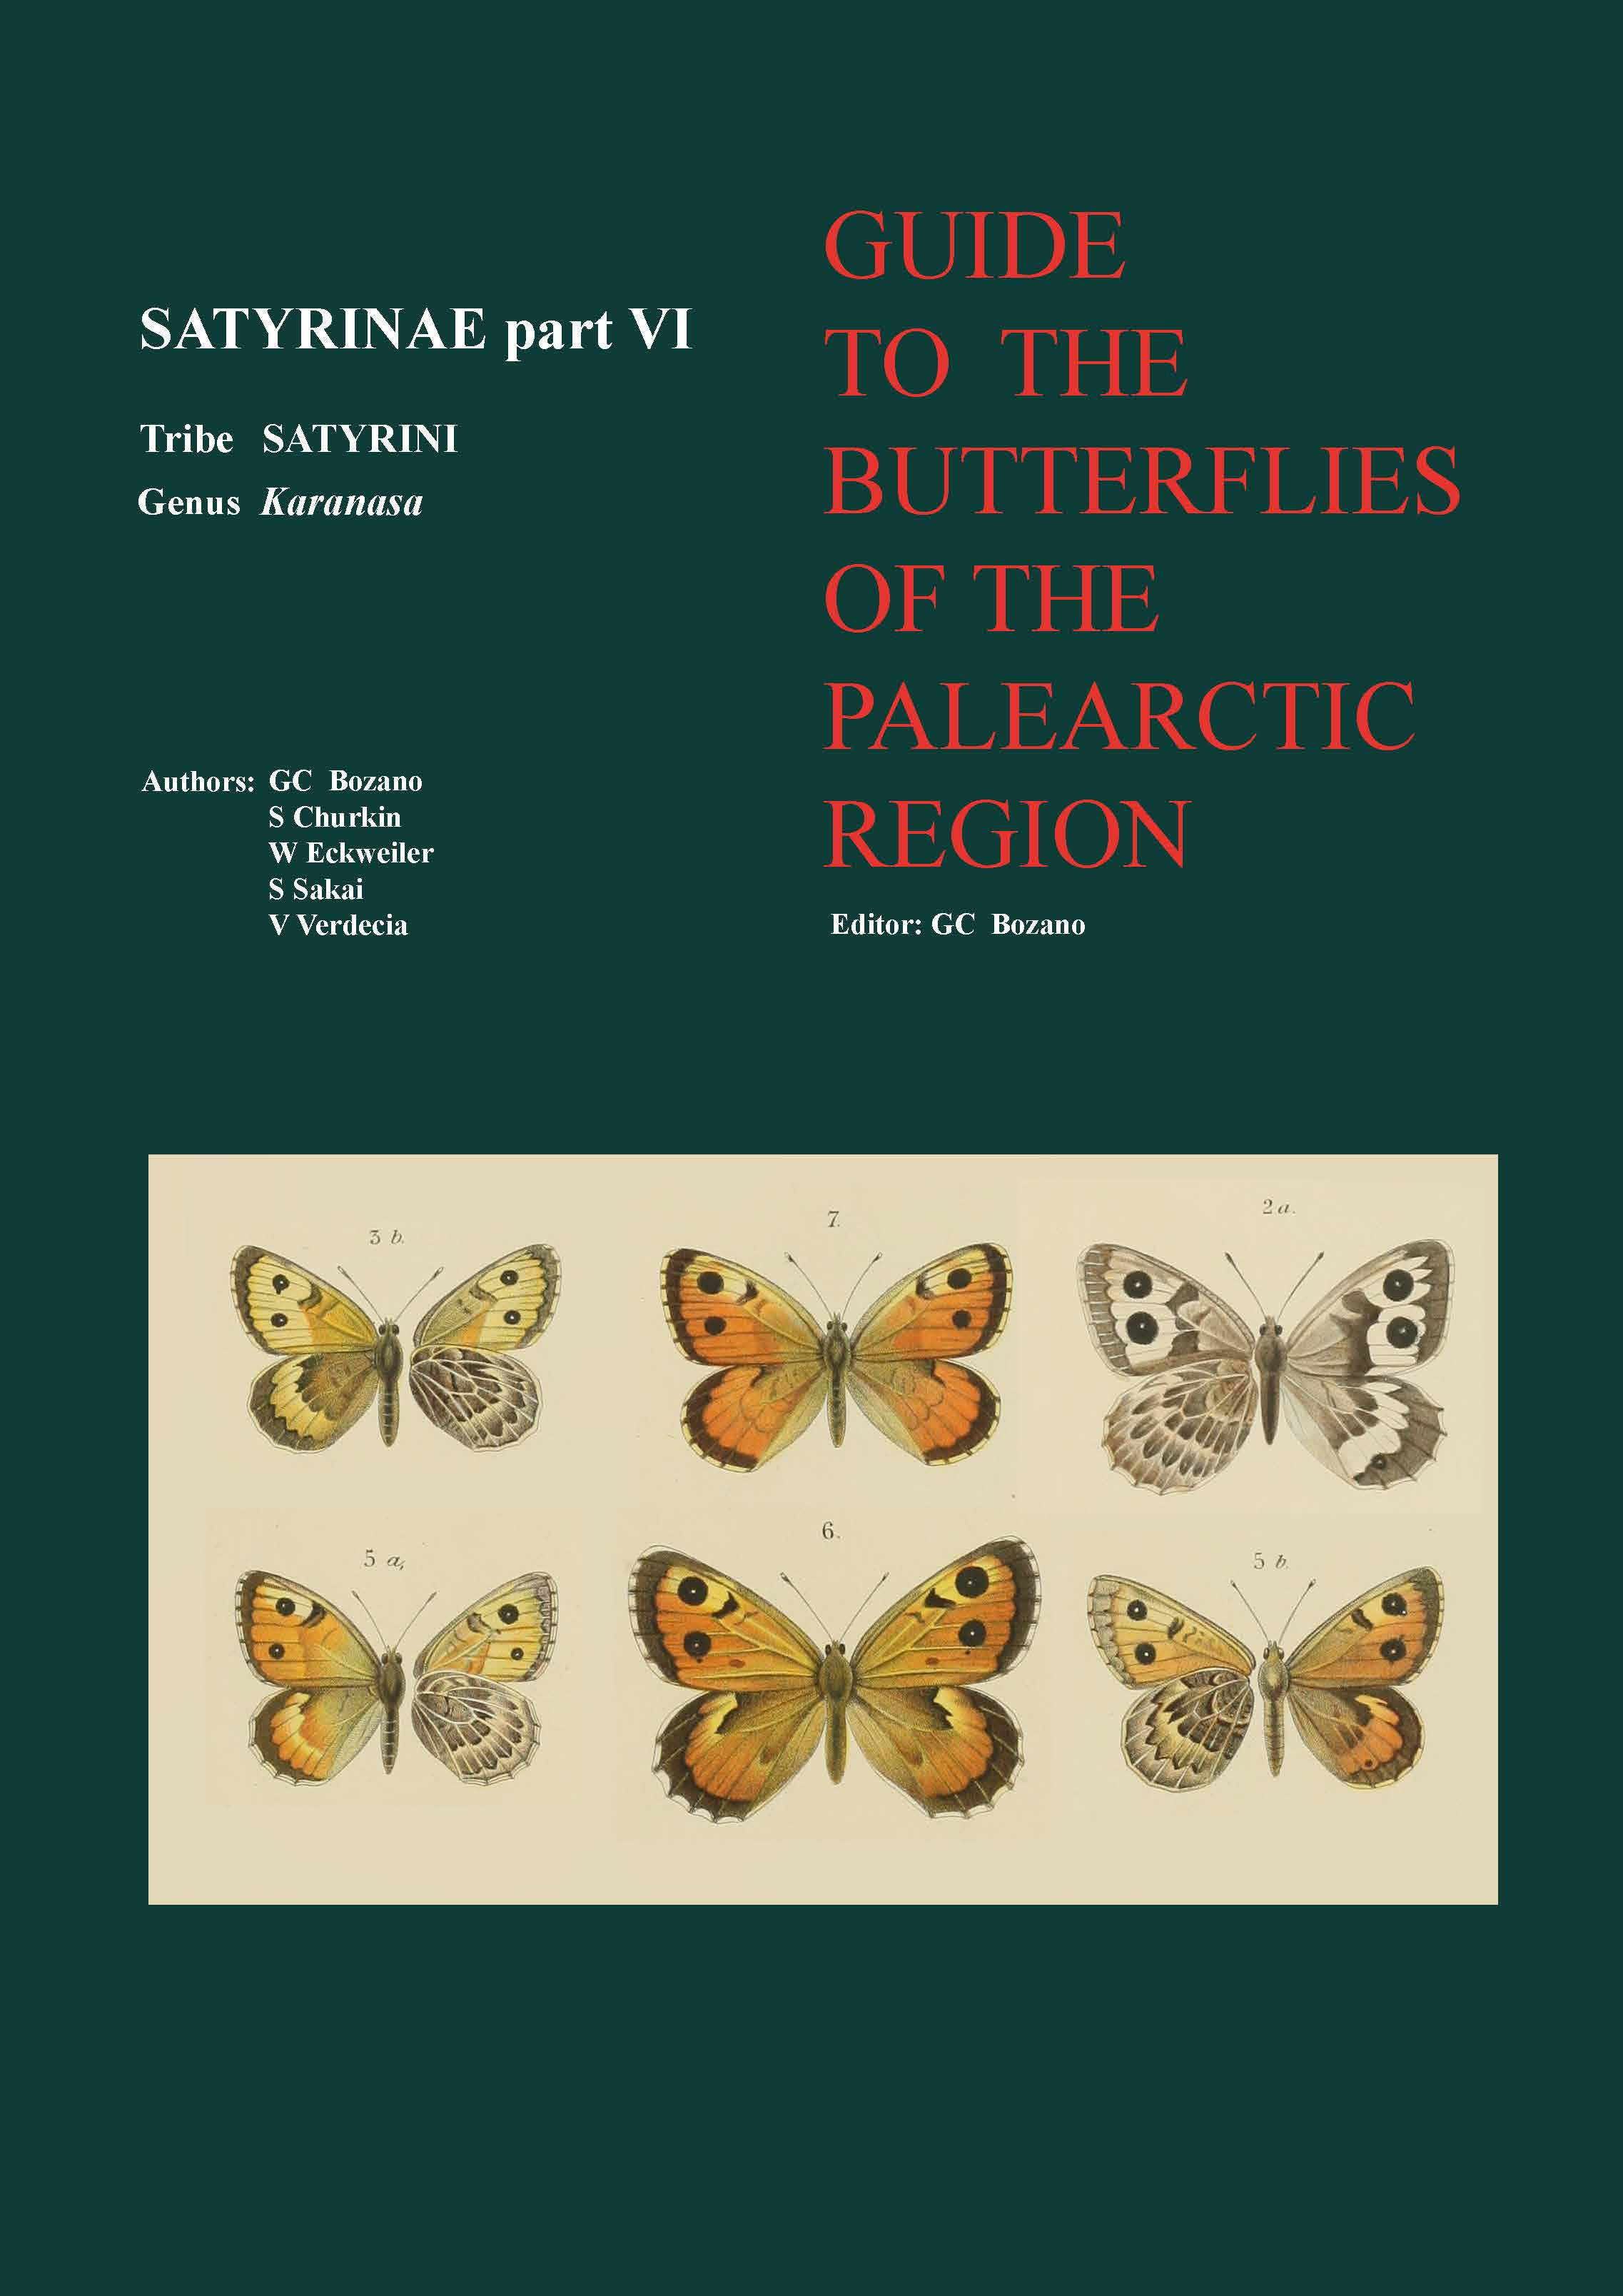 GUIDE TO THE BUTTERFLIES OF THE PALEARTIC REGION SATYRINAE PART VI